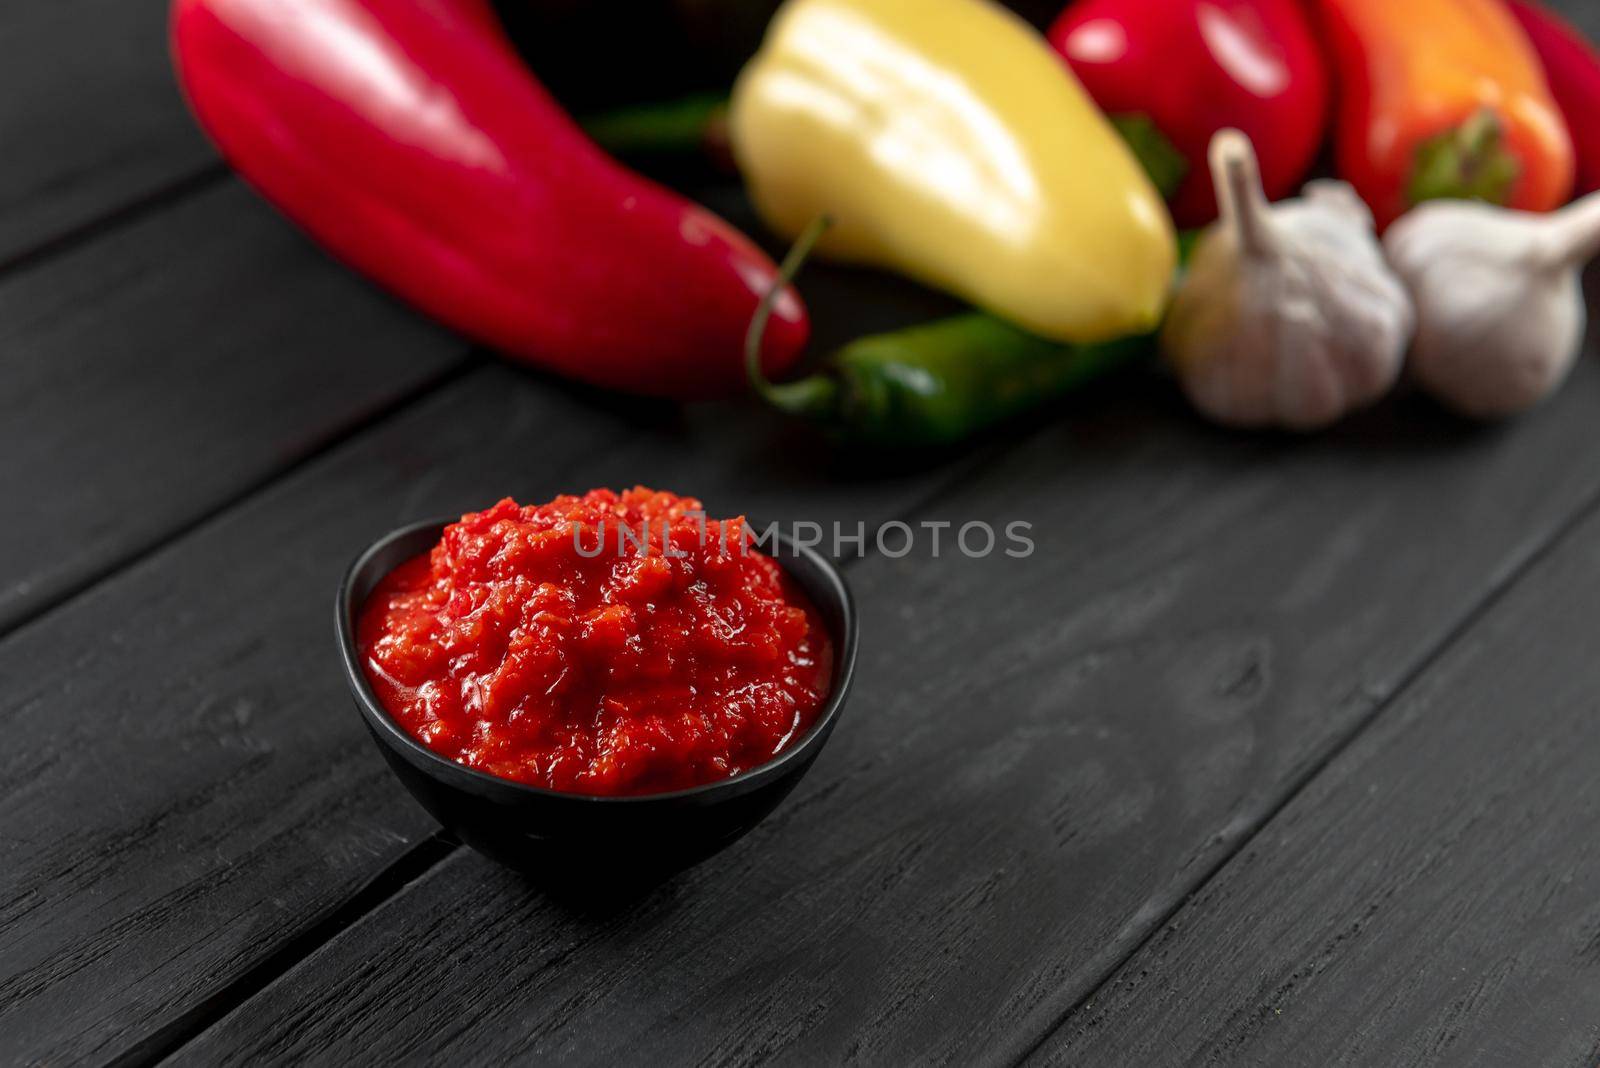 Homemade tomato sauce with red peppers and basil for pasta and pizza in a skillet on a wooden background